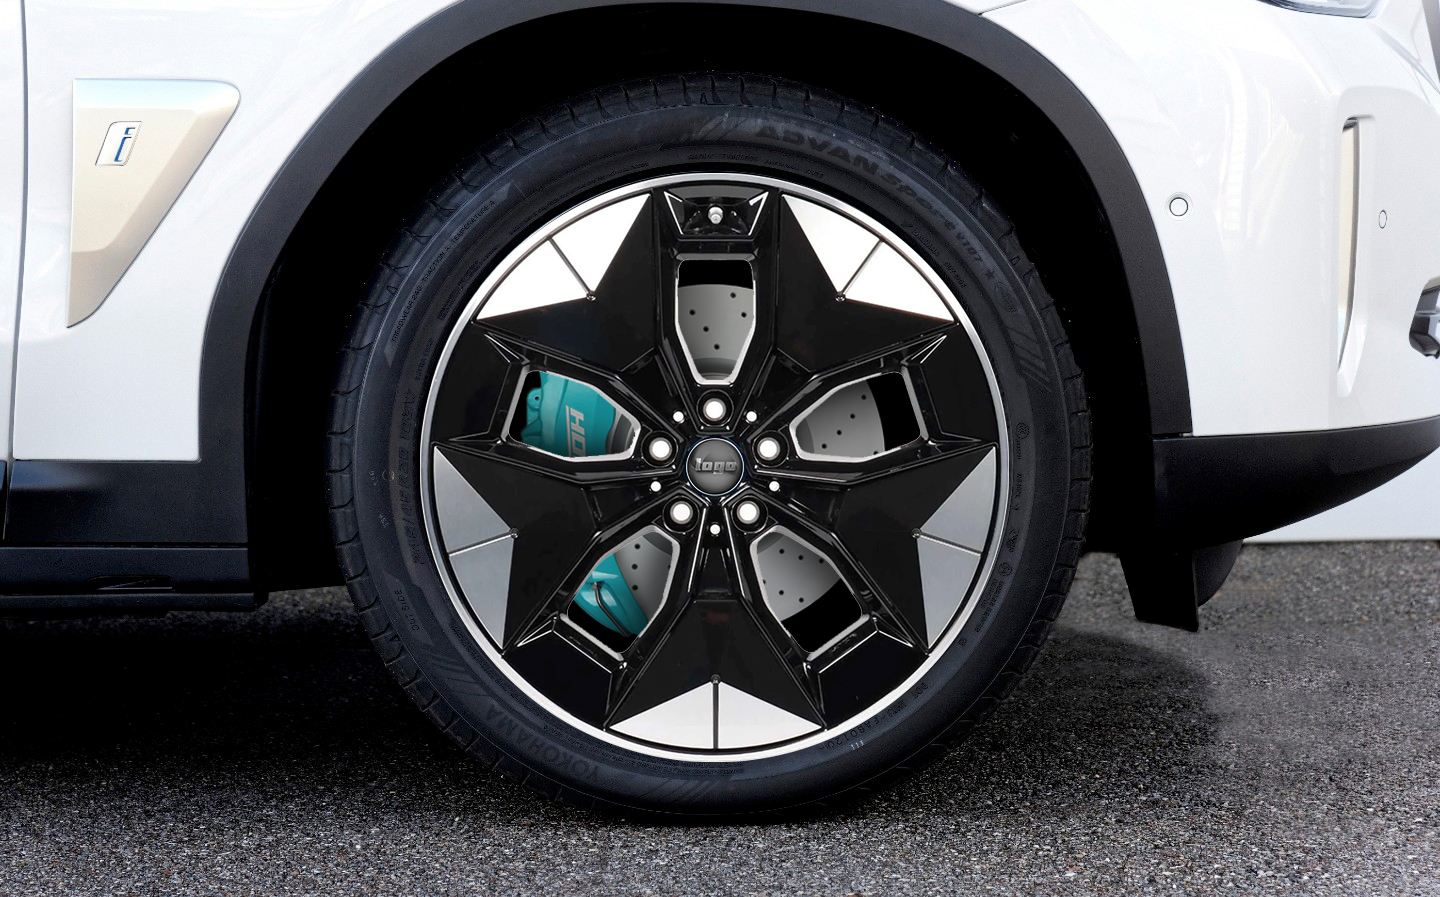 Brakes For New Energy Cars Safeguarding The Drive